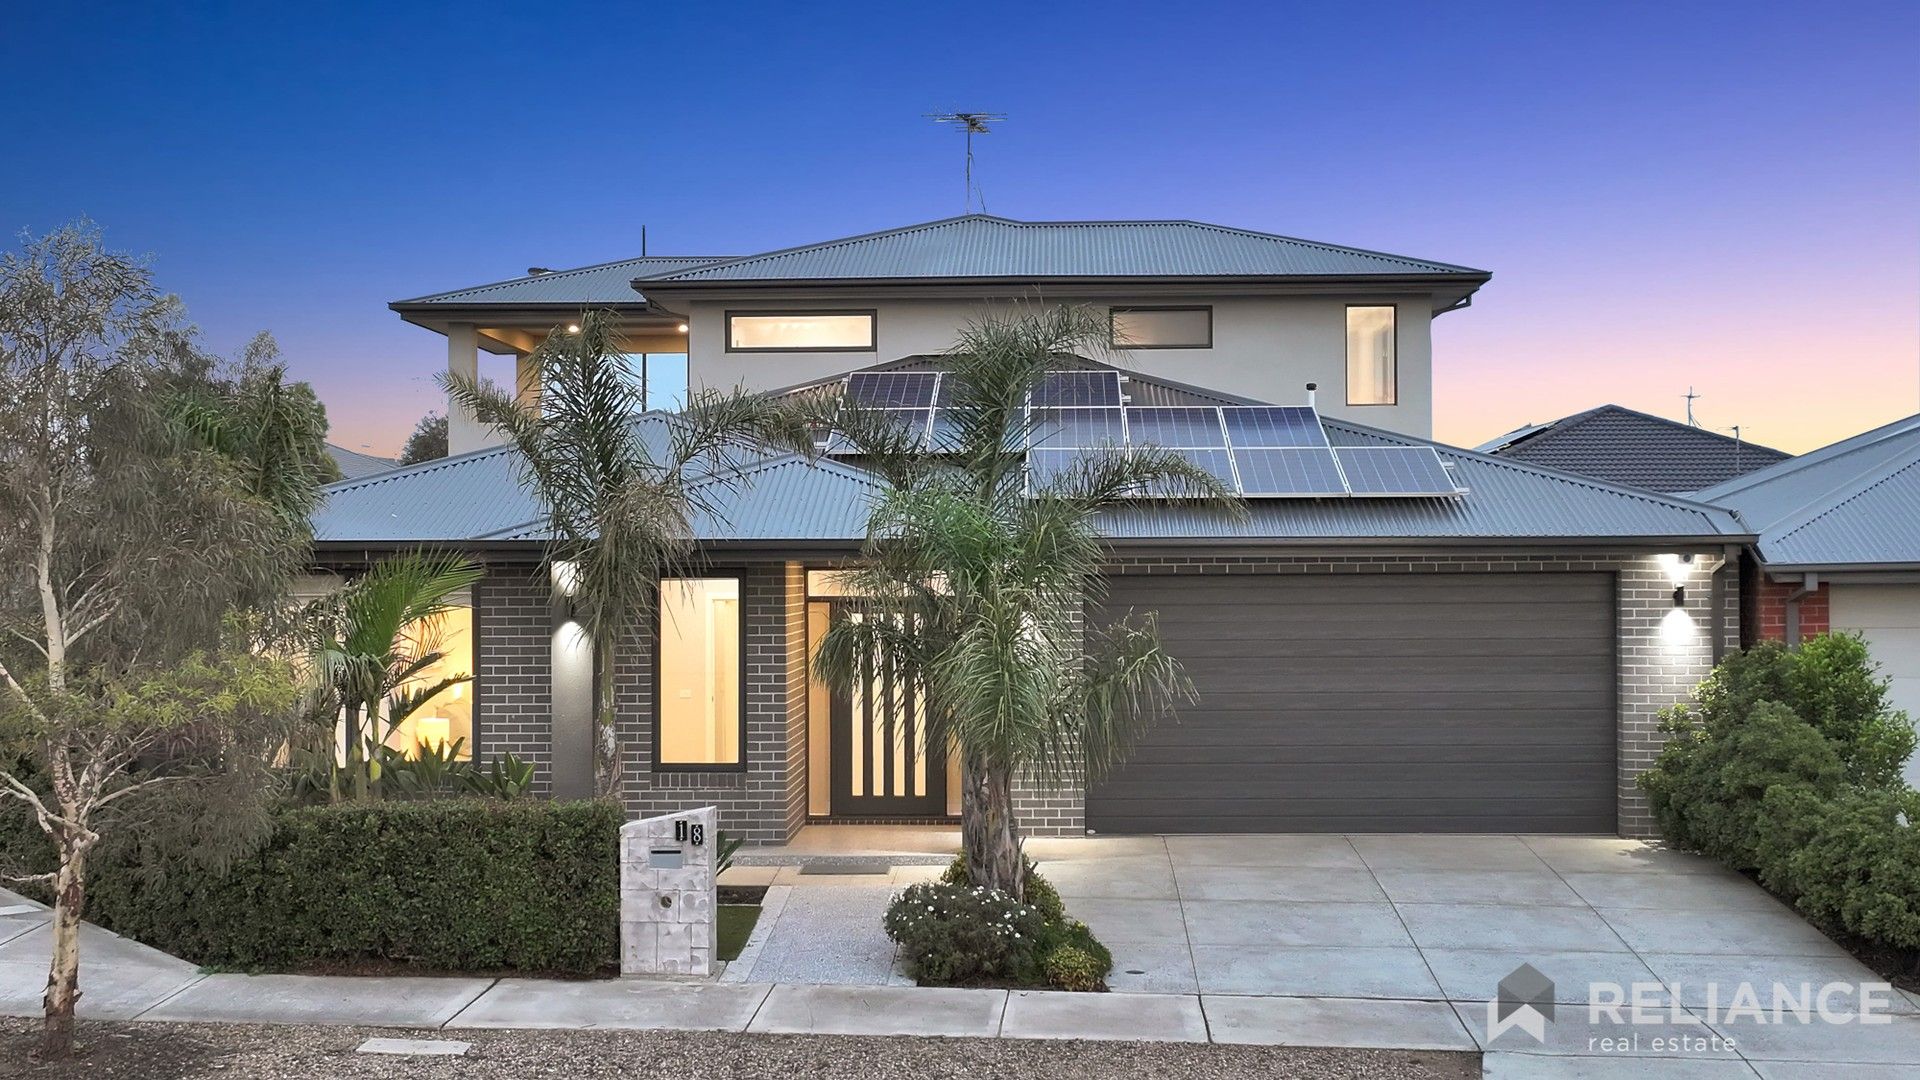 5 bedrooms House in 18 Horizon Street DIGGERS REST VIC, 3427